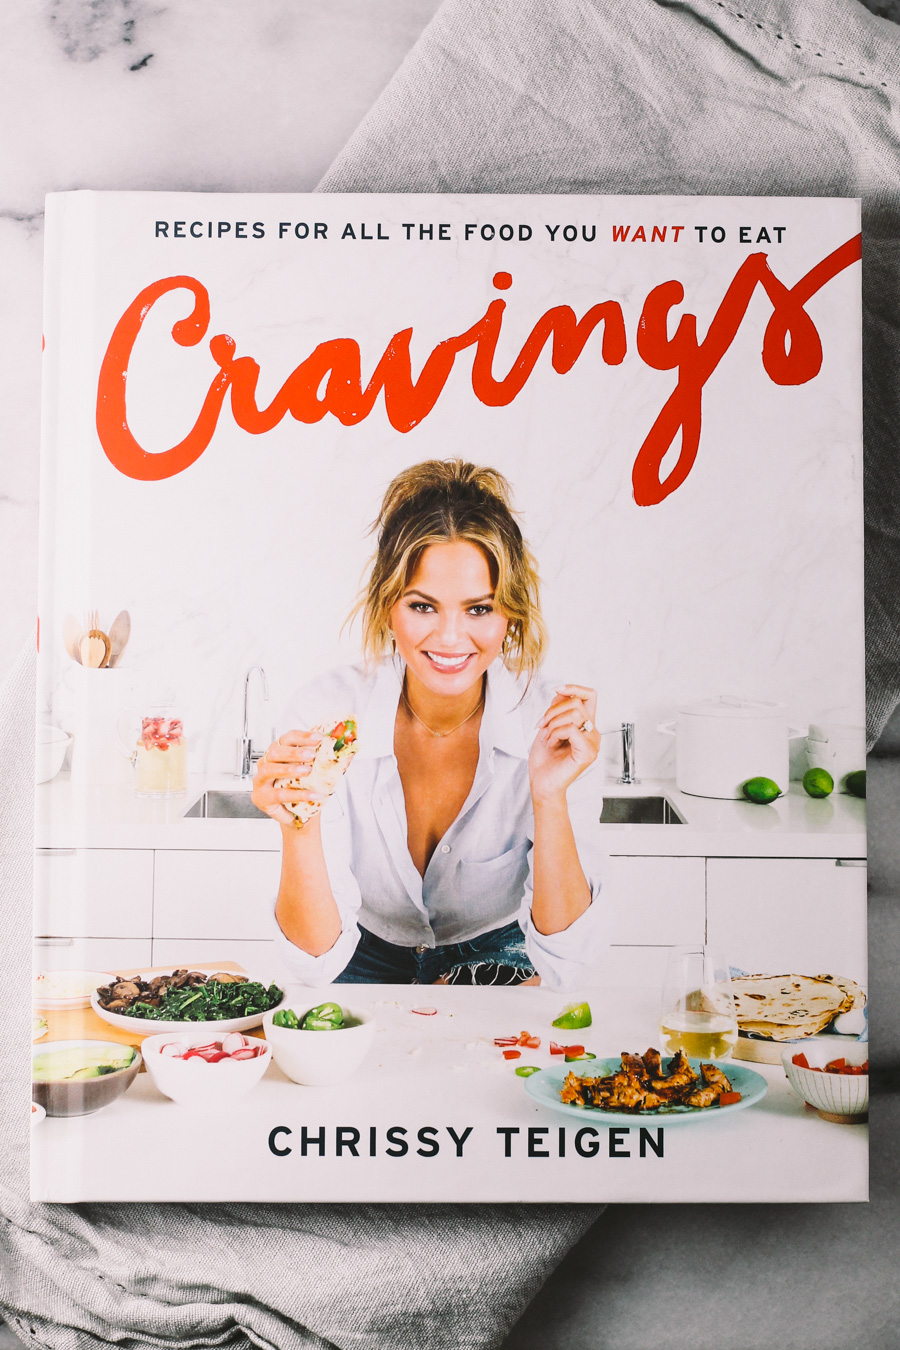 homemade holiday kitchenista gift basket essential #1: chrissy teigen's cookbook | a homemade gift basket perfect for the young & trendy person who is just starting to take interest in food & dining. this gift basket also features some prosecco for a festive holiday cocktail, on-trend bar gadgets.